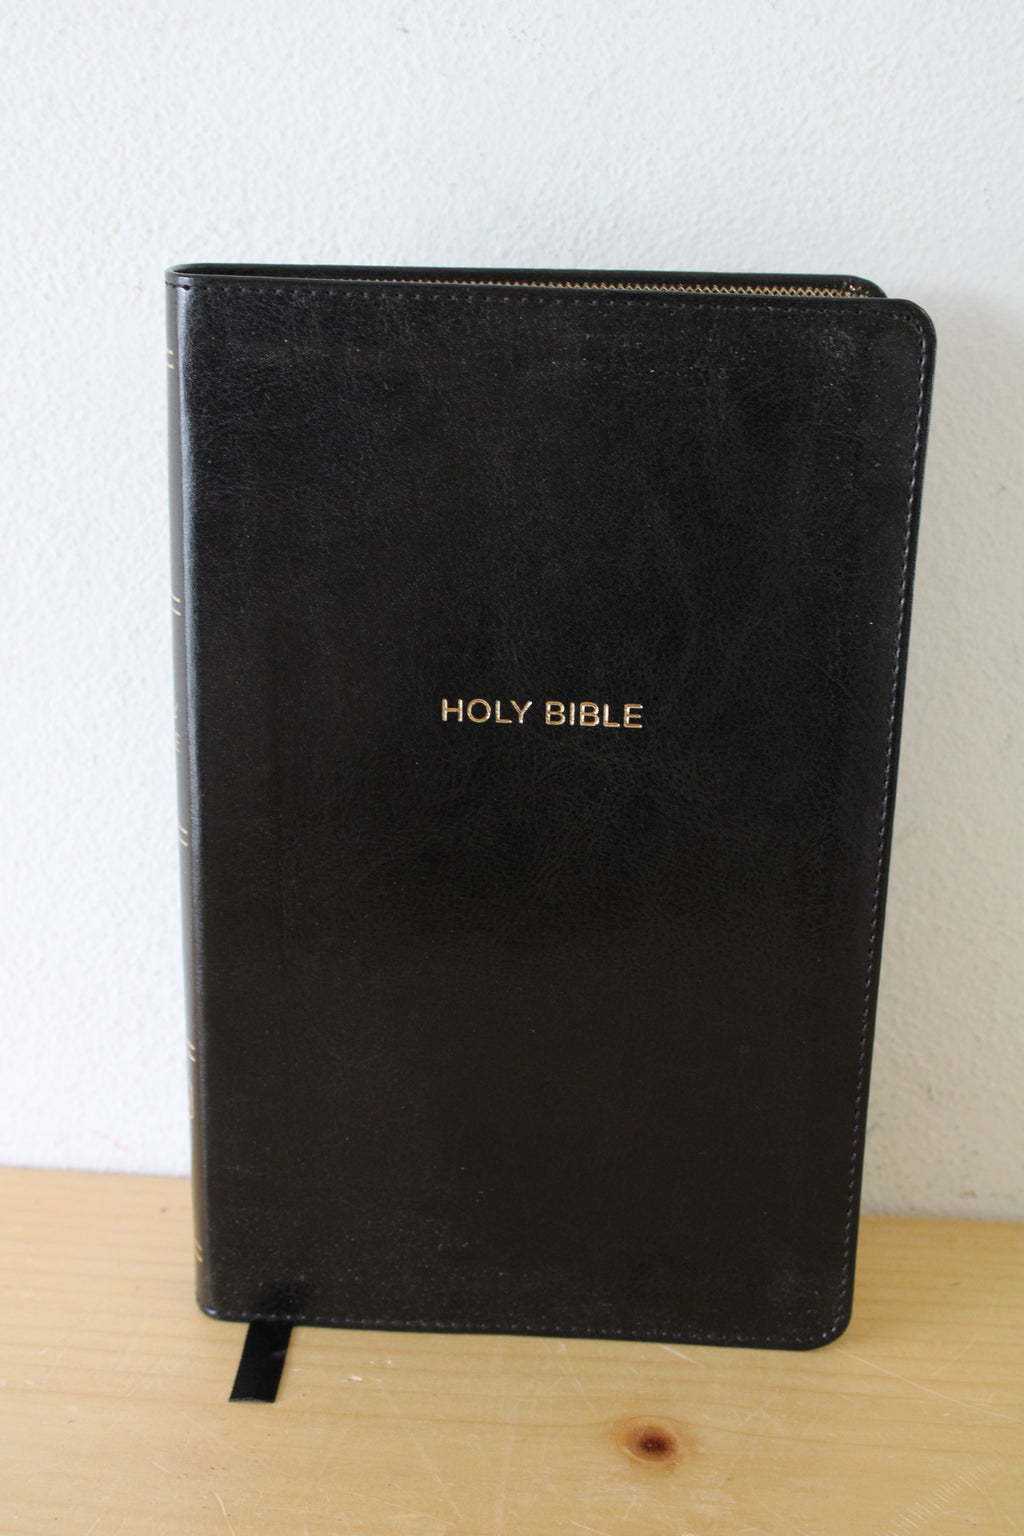 Holy Bible NKJV Thinline Reference Bible Copyright 2018 By Thomas Nelson